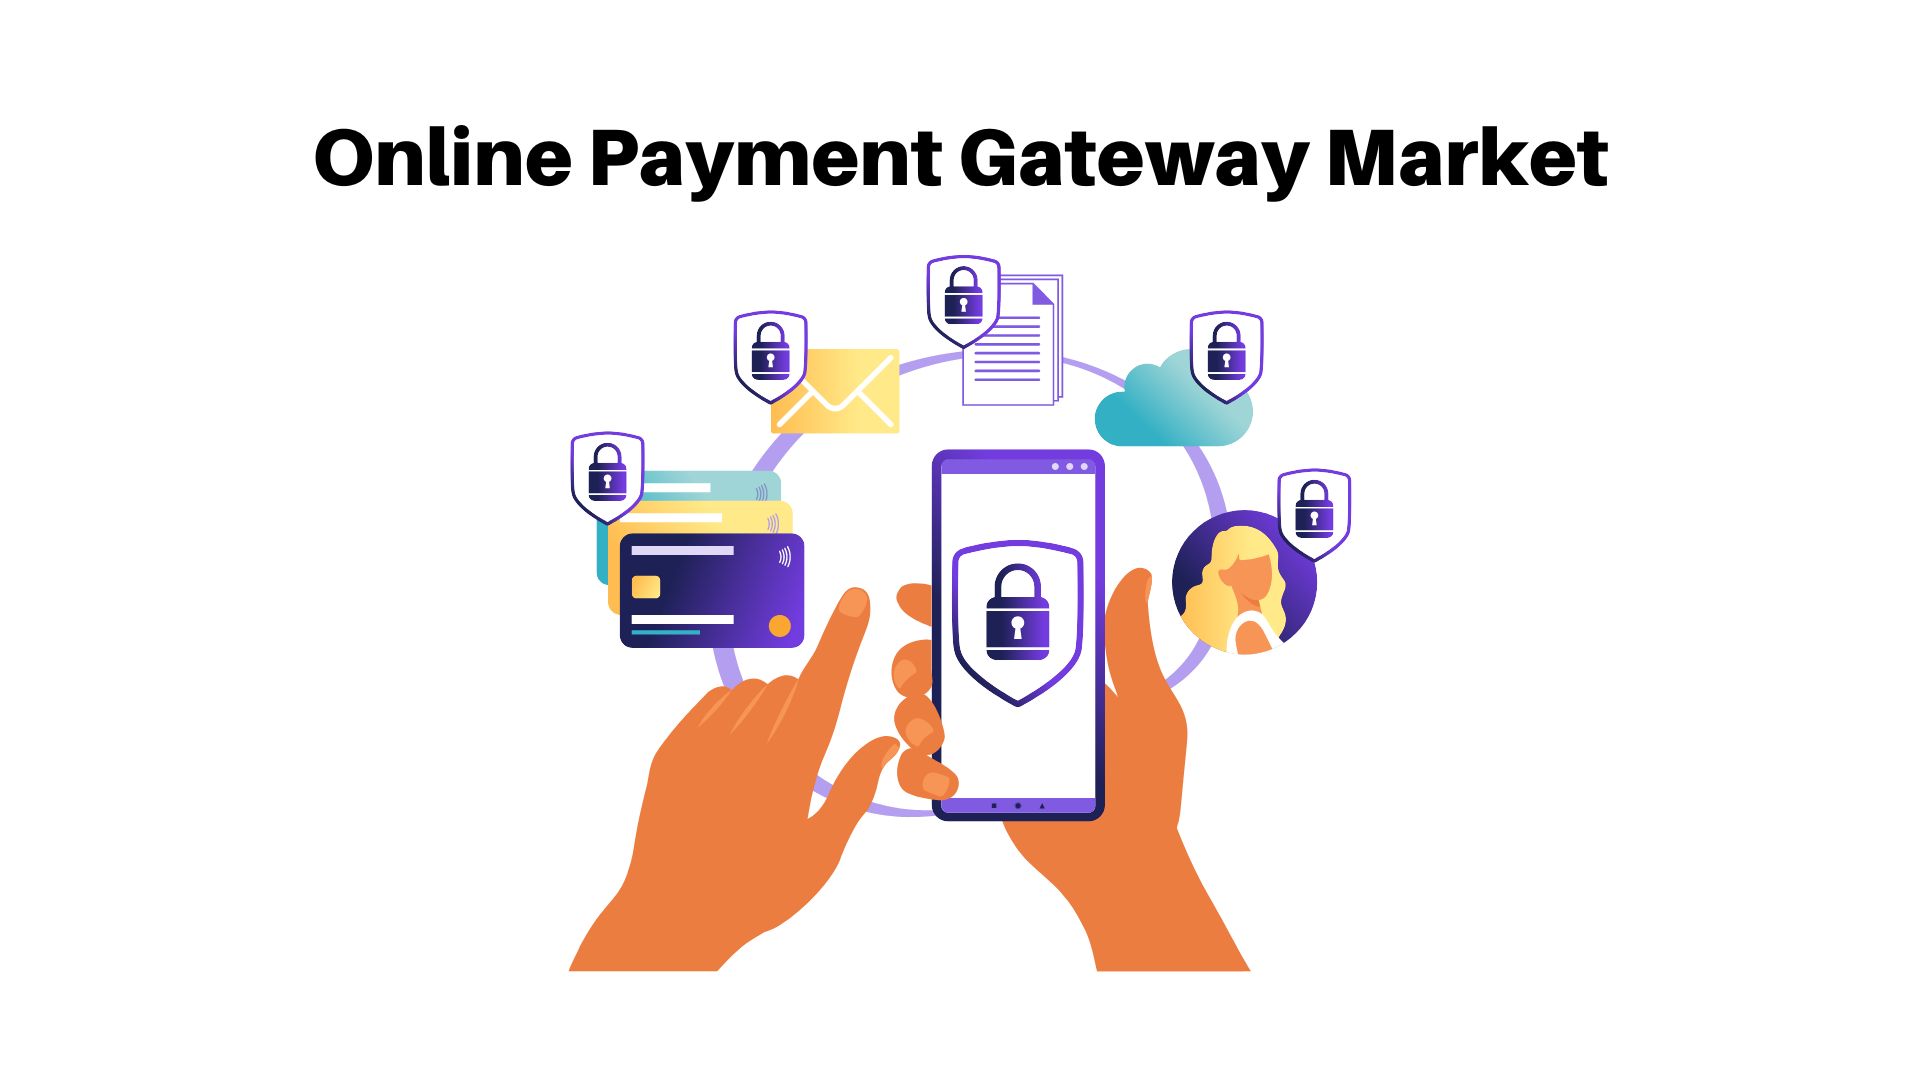 Online Payment Gateway Market is poised to grow at a CAGR of 22.2{3df20c542cc6b6b63f1c547f8fb389a9f235bb0504150b9df2ff264aa9a6c16c} by 2032